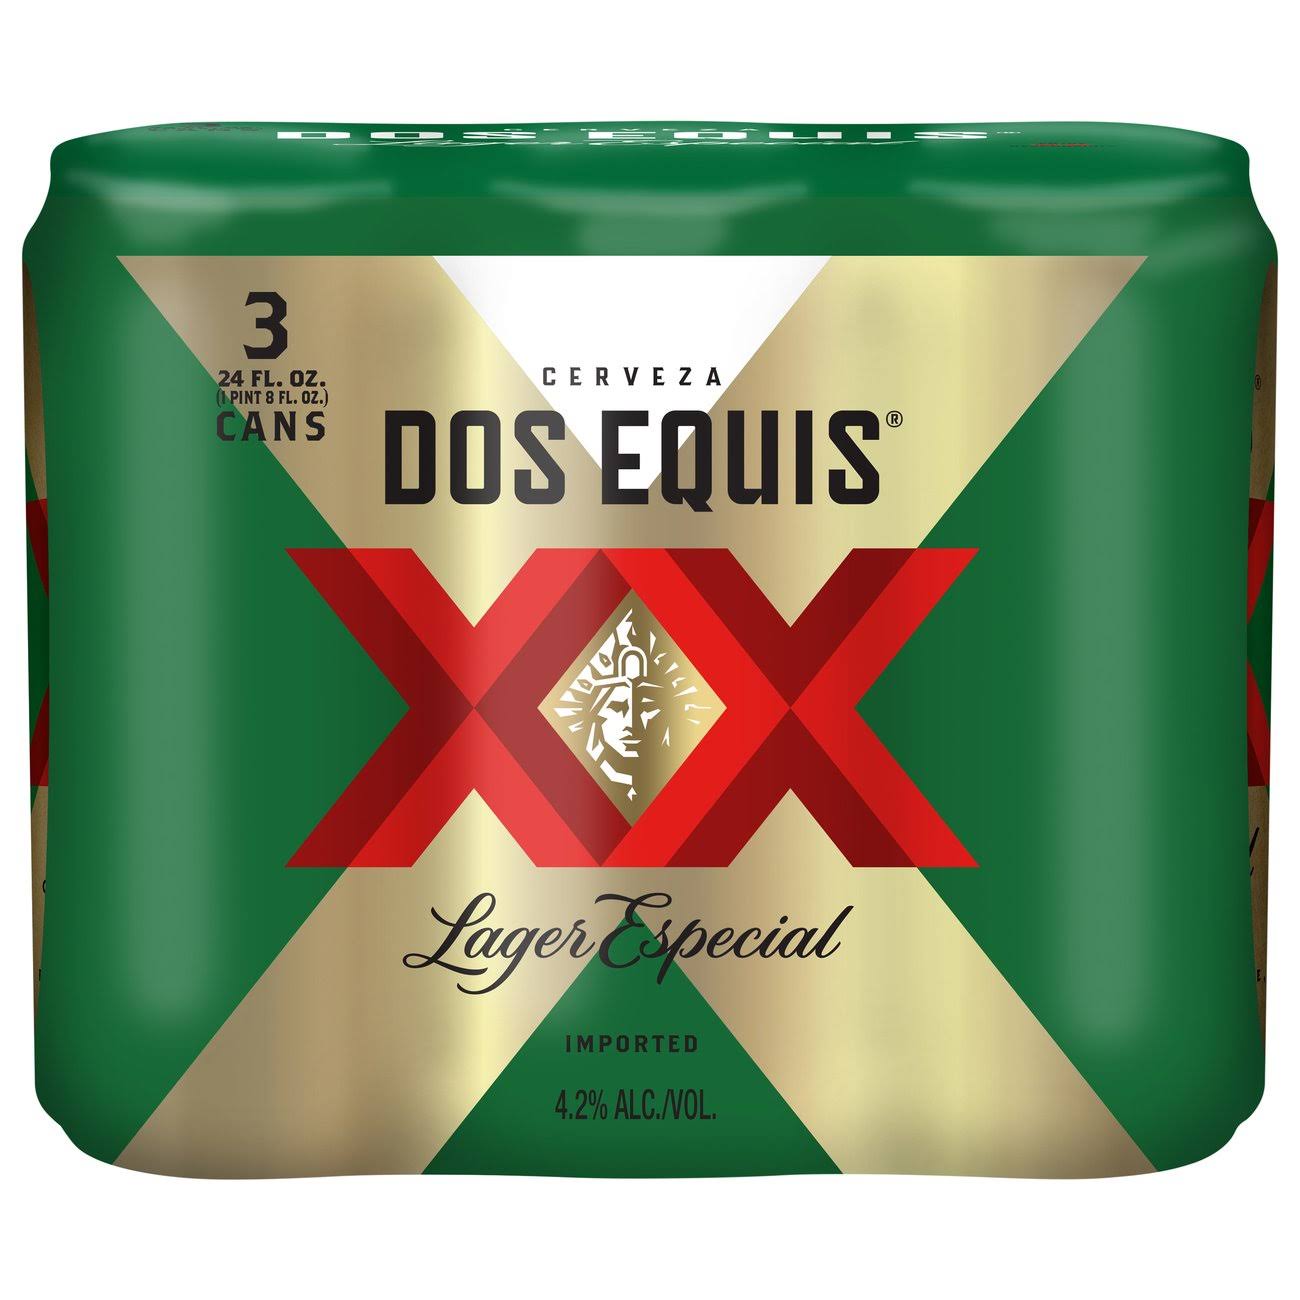 Dos Equis Beer, Lager Especial - 3 pack, 24 fl oz cans